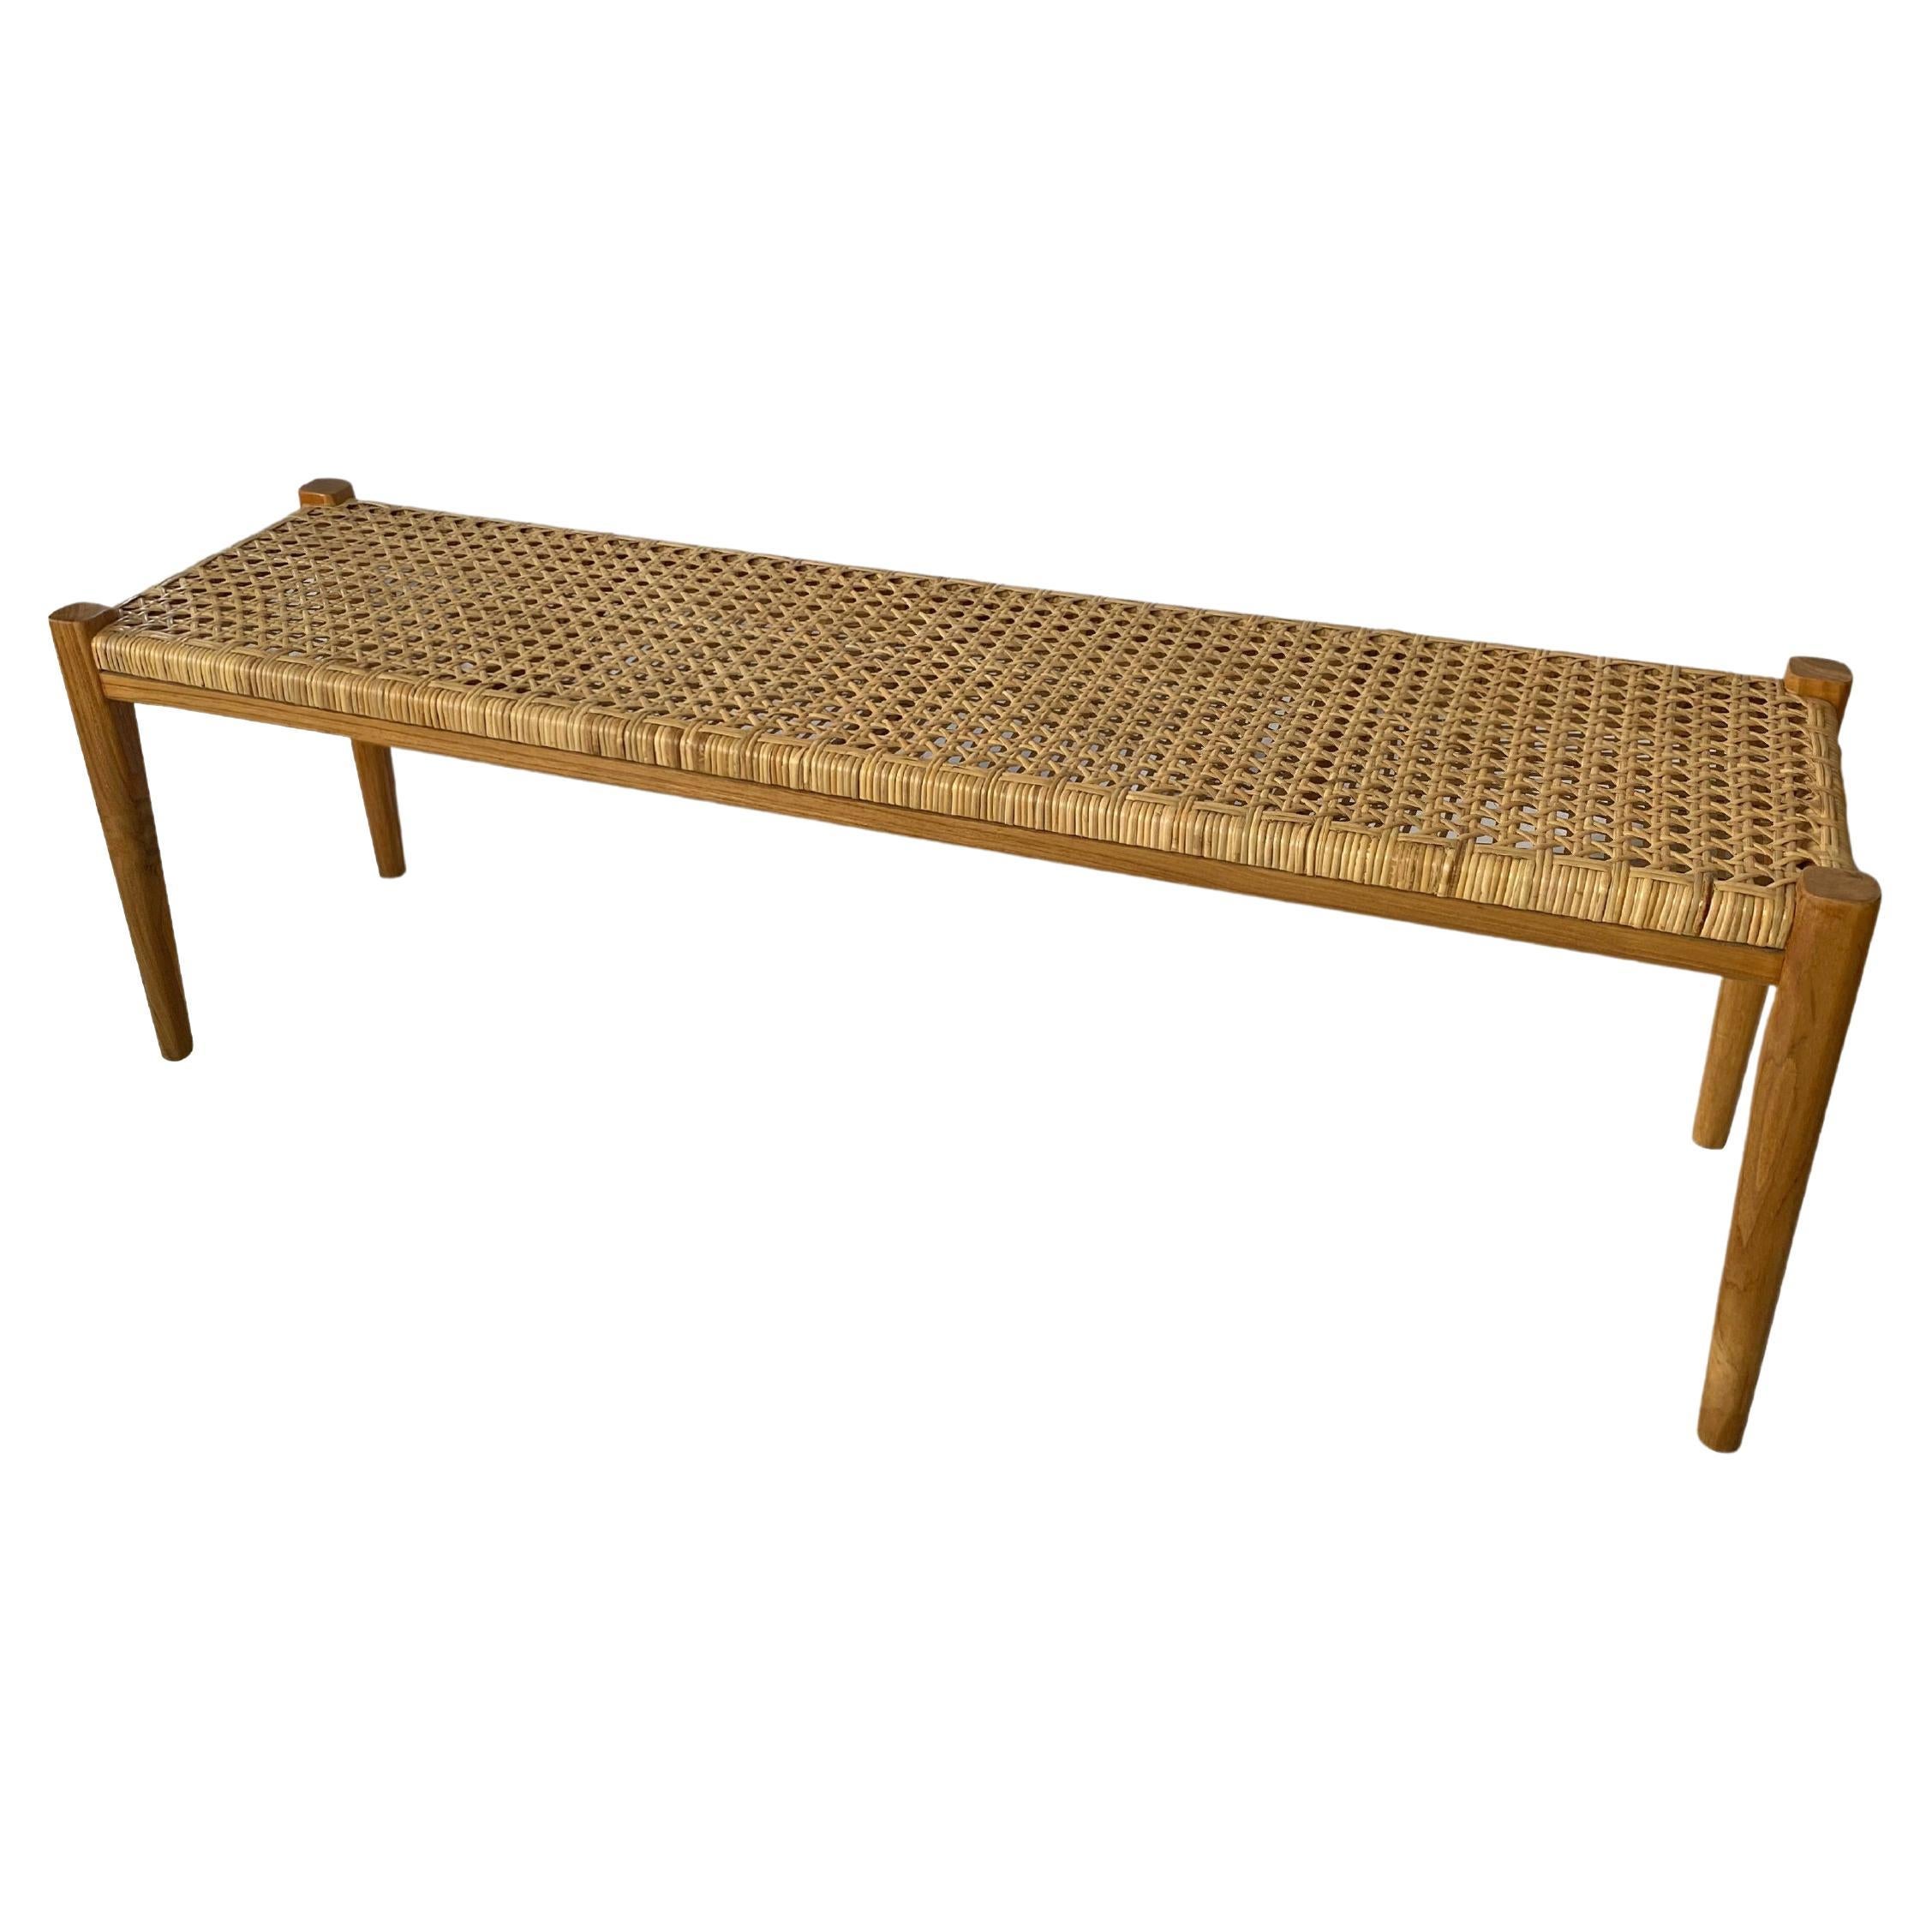 Teak Wood Framed Bench, with Woven Rattan Seat For Sale